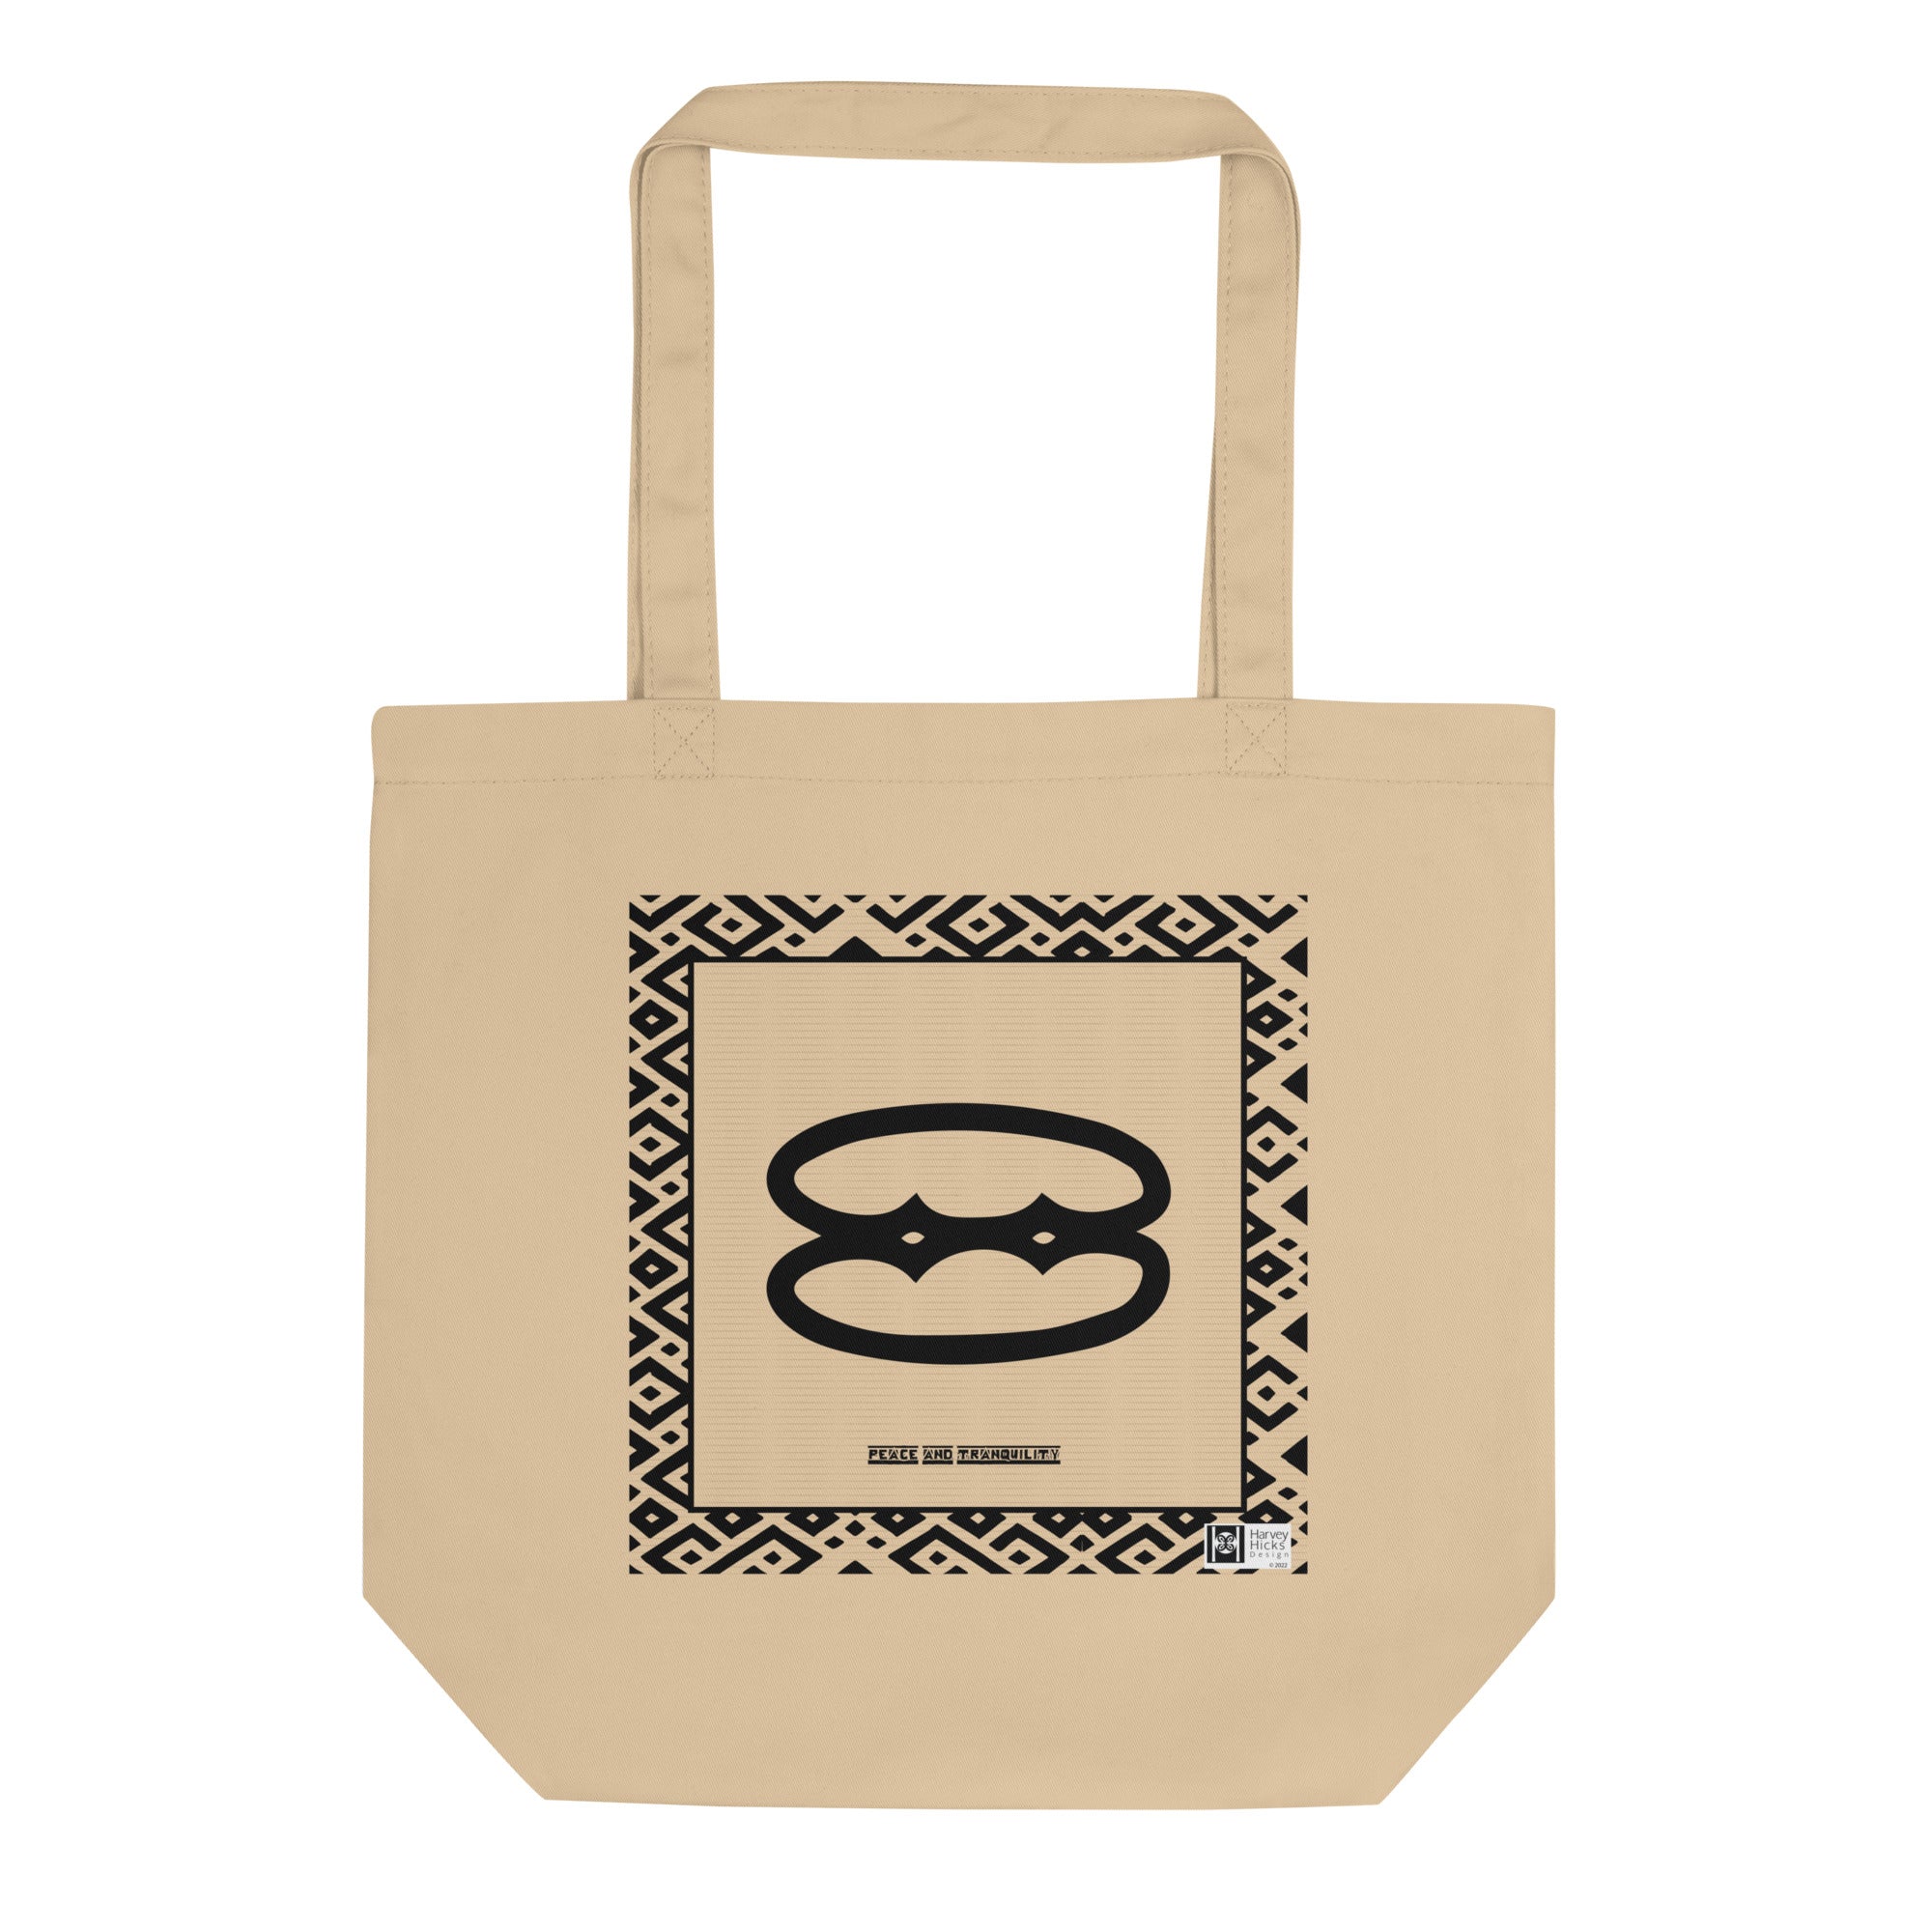 100% cotton Eco Tote Bag, featuring the Adinkra symbol for peace